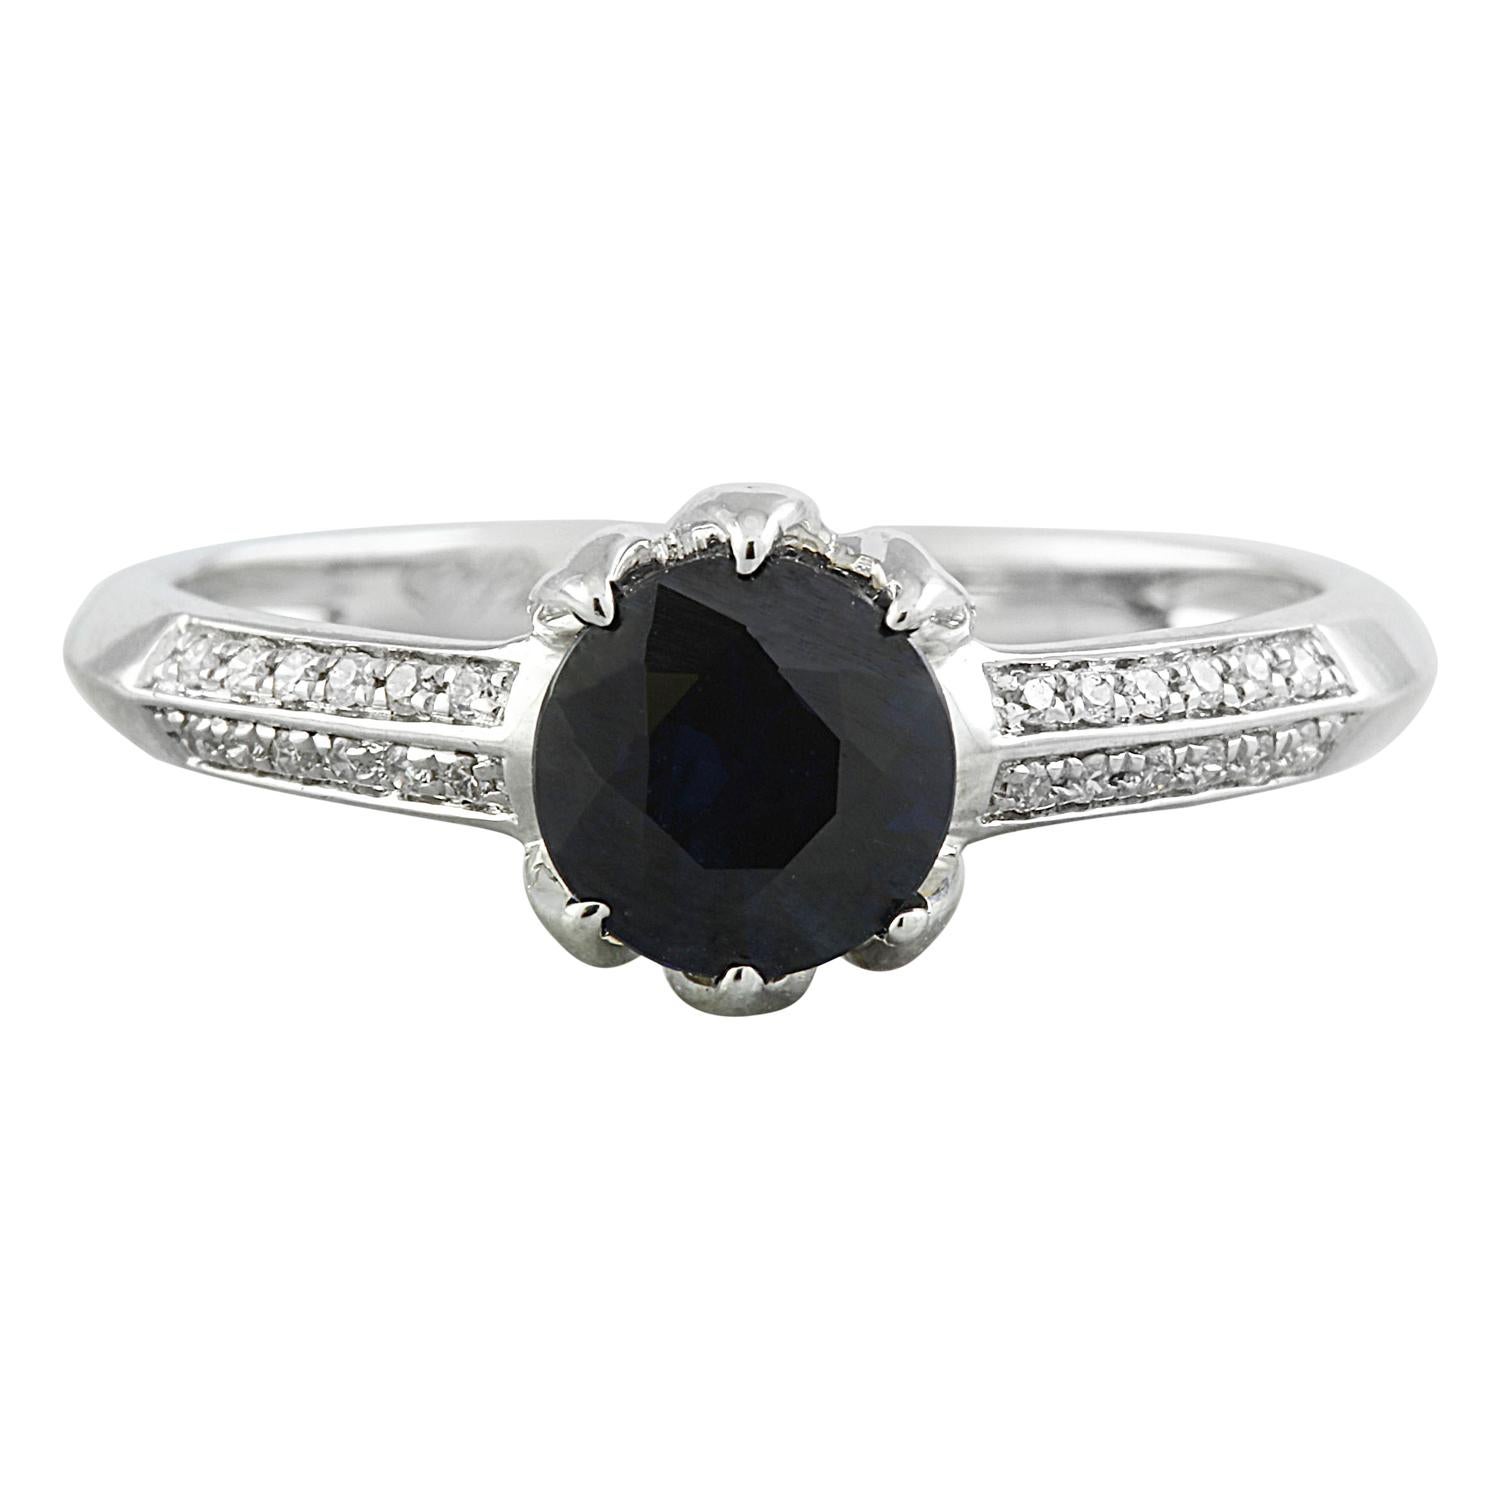 Exquisite Natural Sapphire Diamond Ring in 14K Solid White Gold